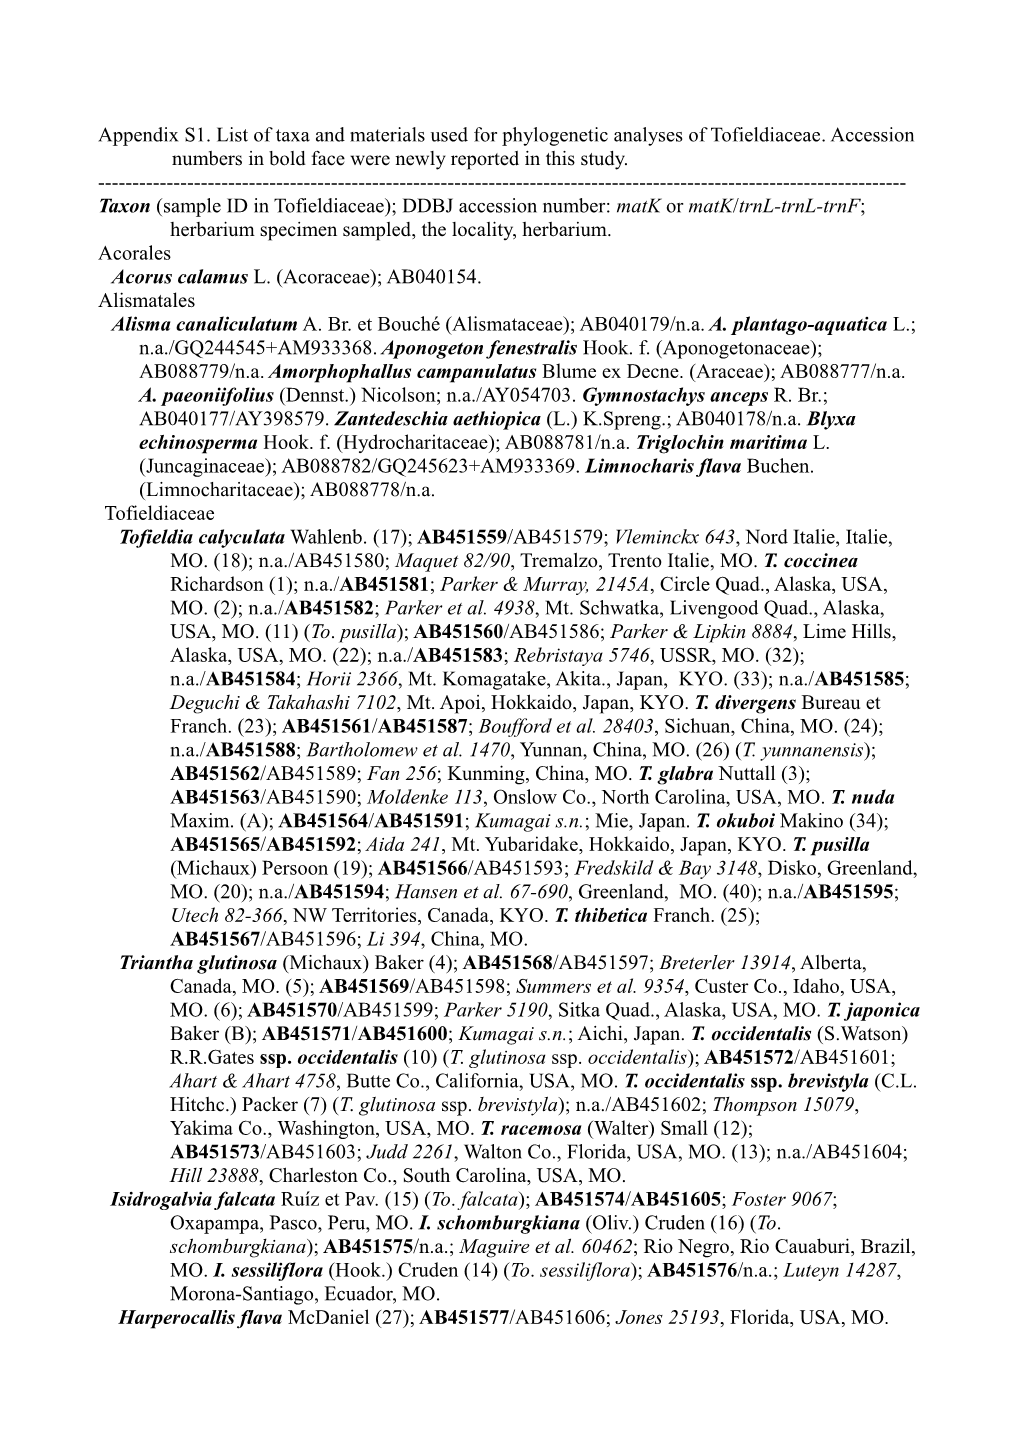 Appendix S1. List of Taxa and Materials Used for Phylogenetic Analyses of Tofieldiaceae